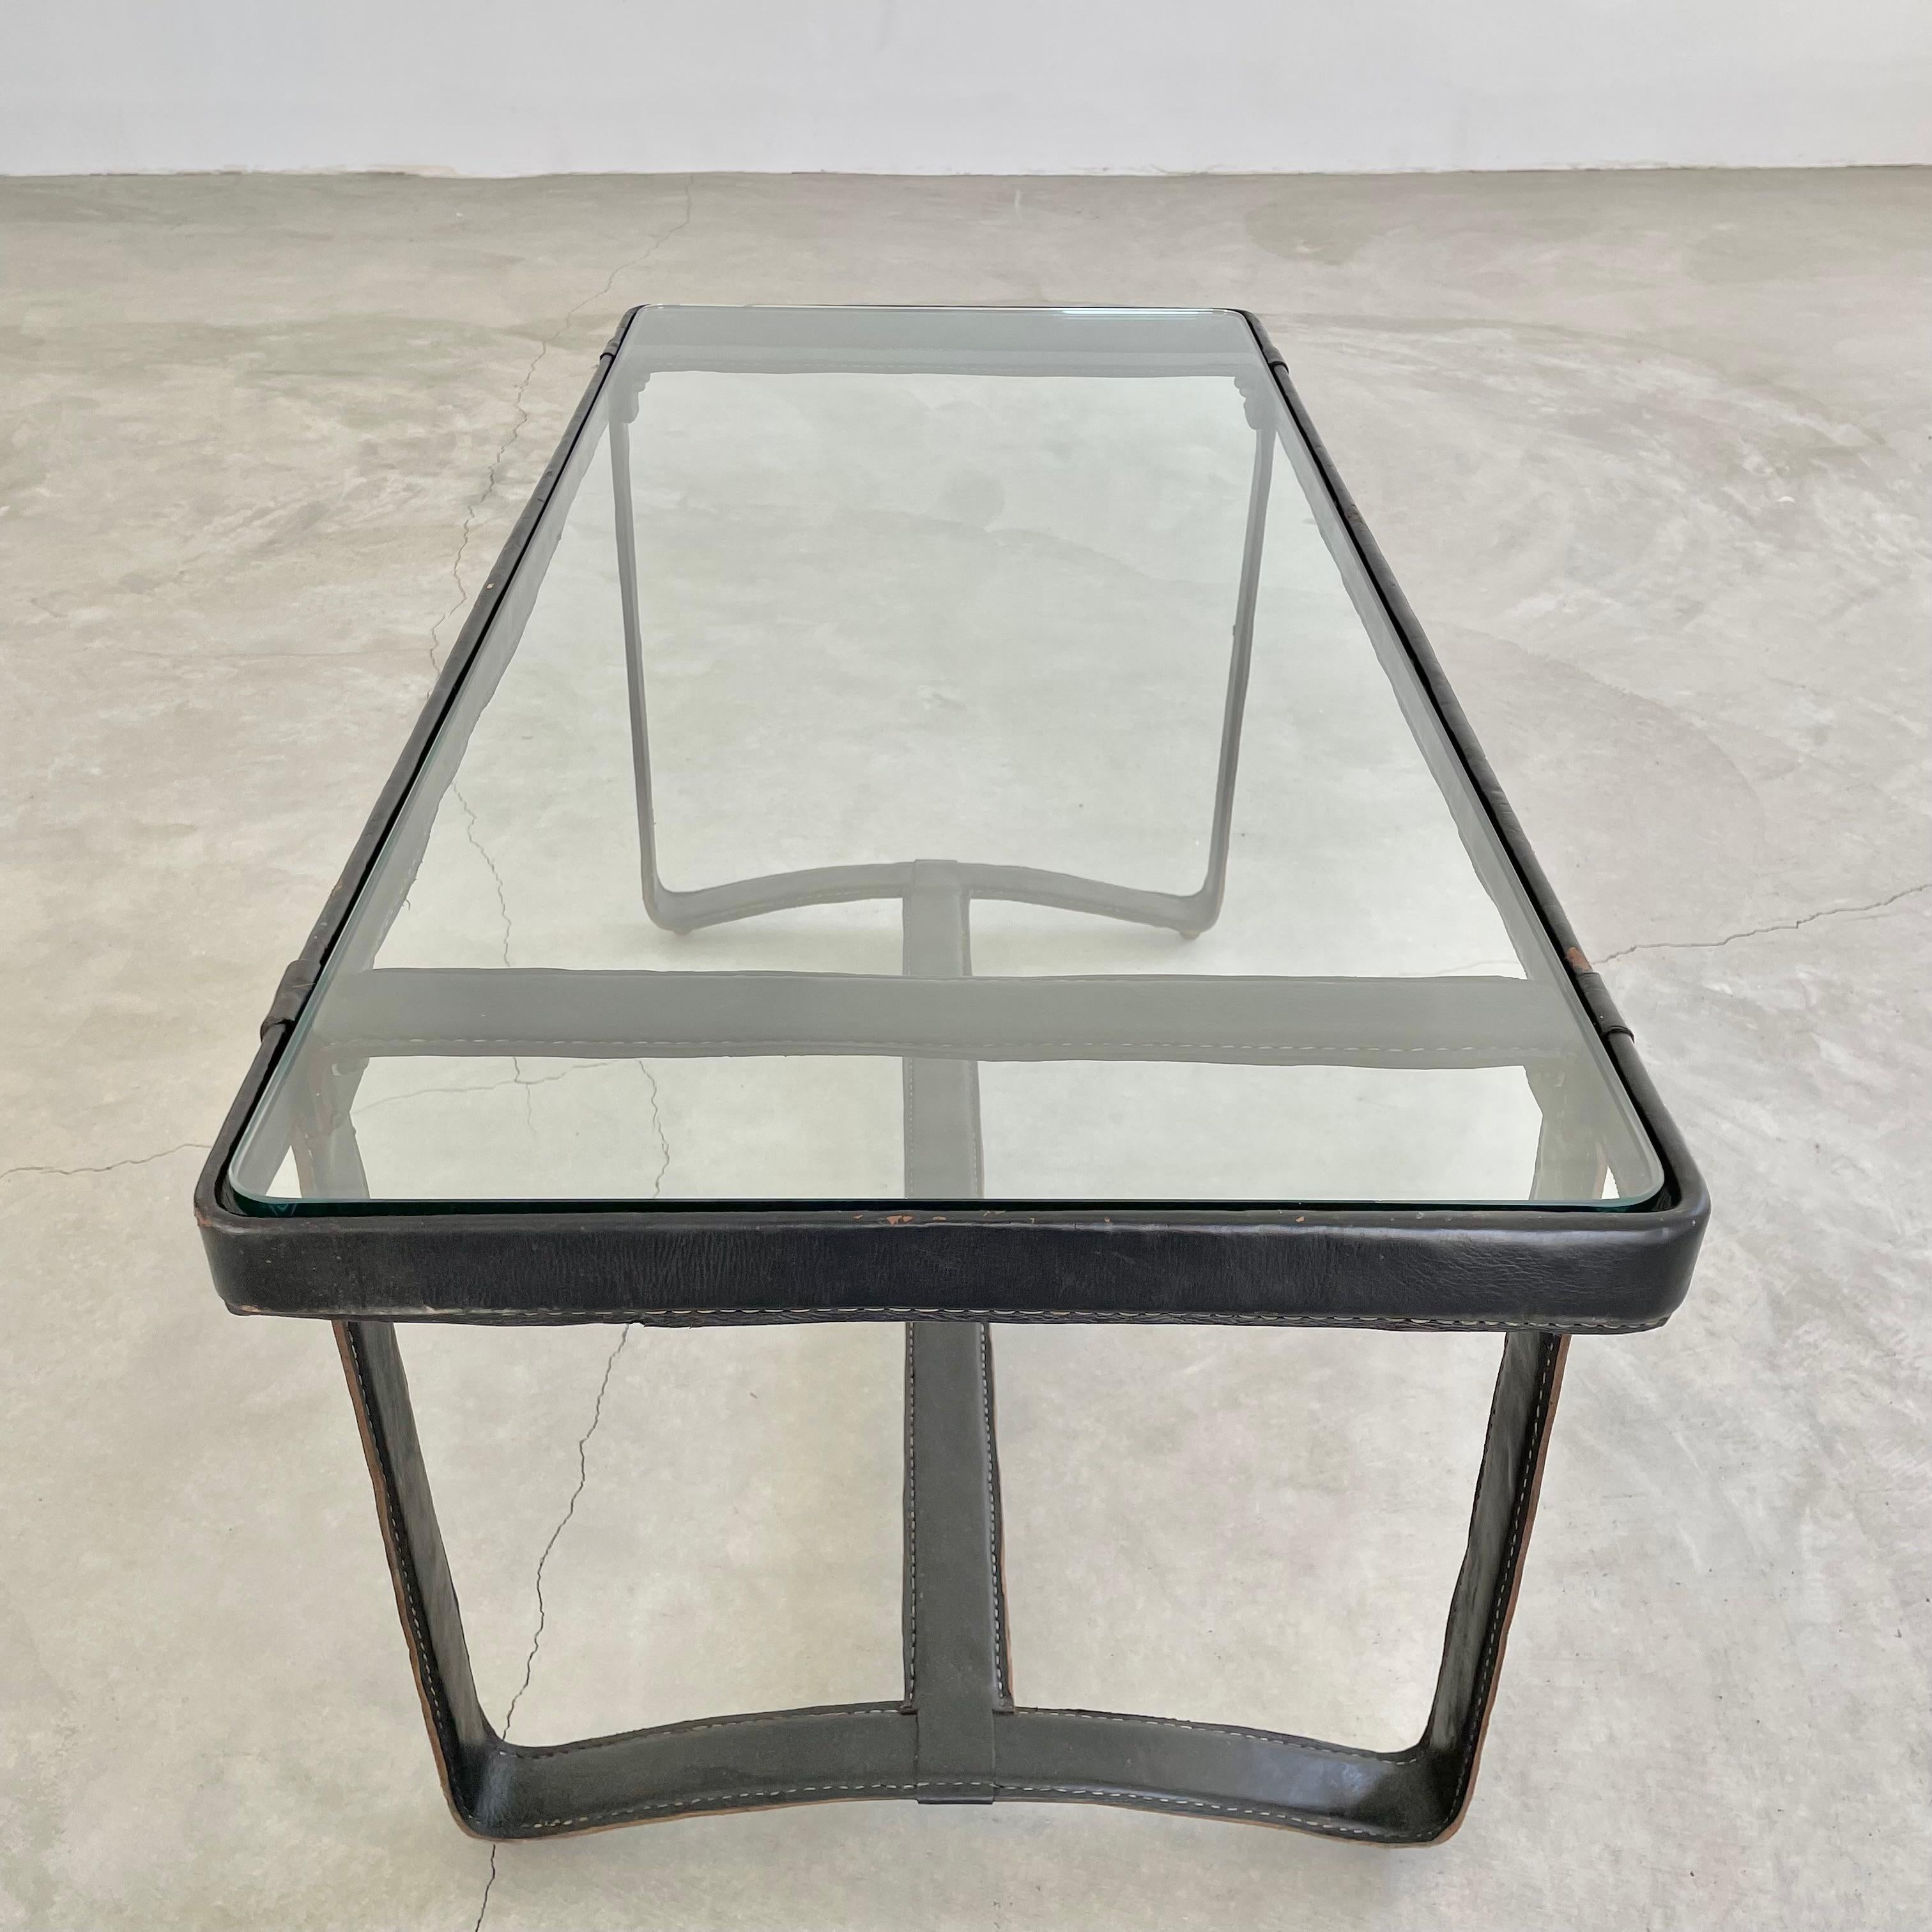 Jacques Adnet Leather Coffee Table, 1950s For Sale 4